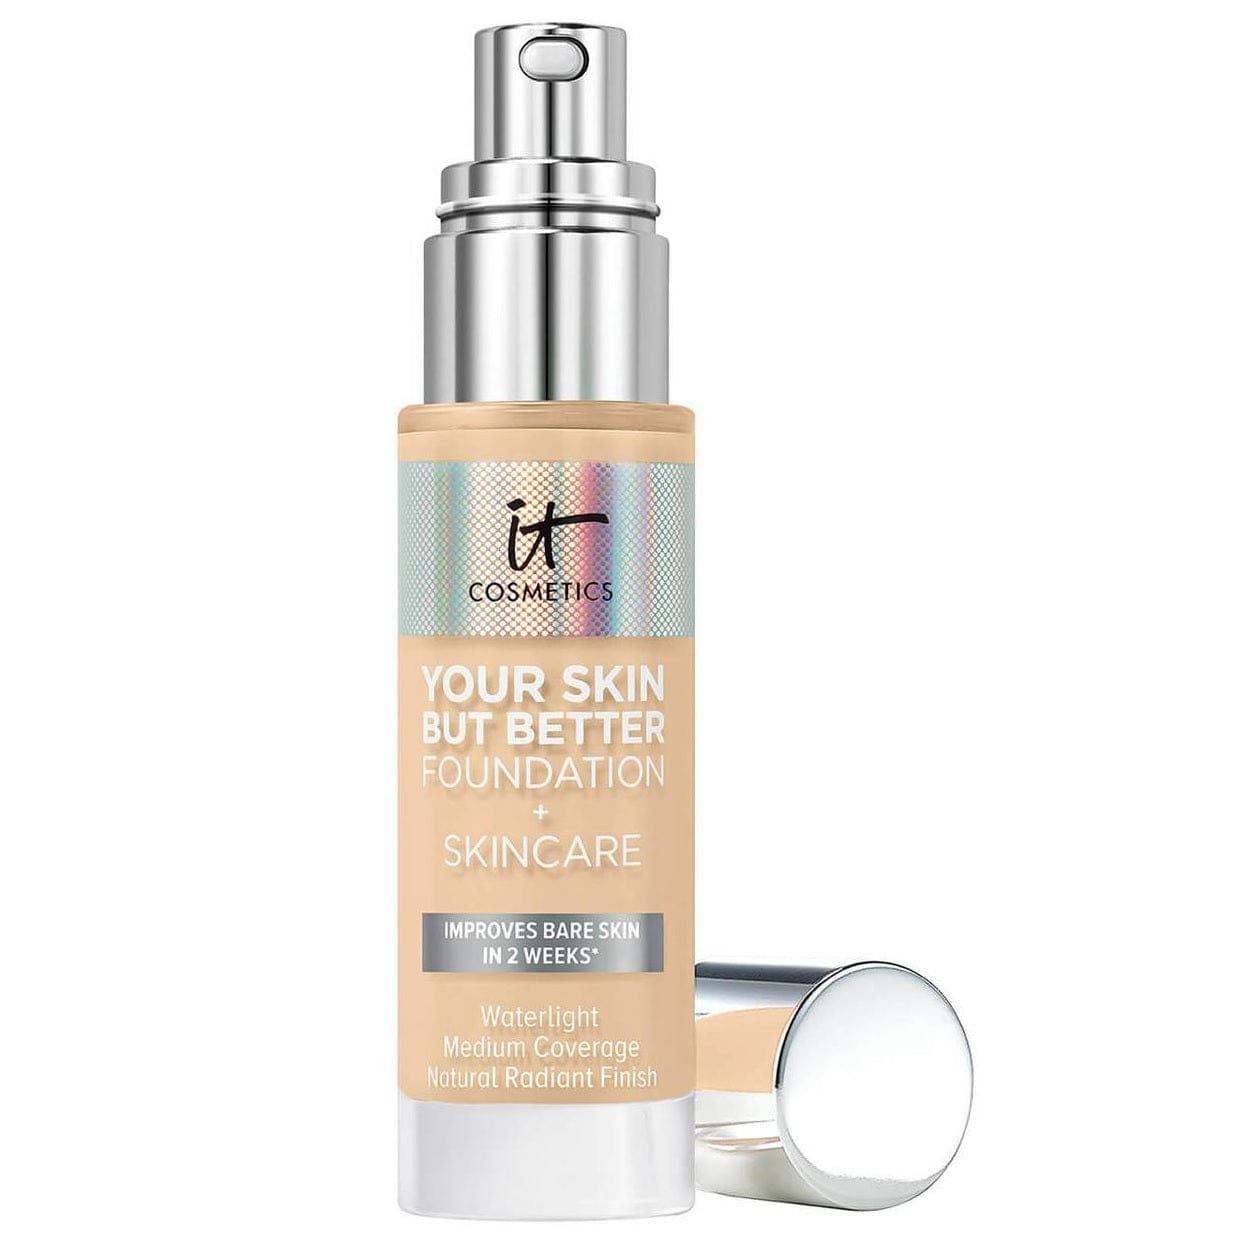 IT COSMETICS Beauty IT Cosmetics Your Skin But Better Foundation and Skincare 30ml - 22.5 Light Warm